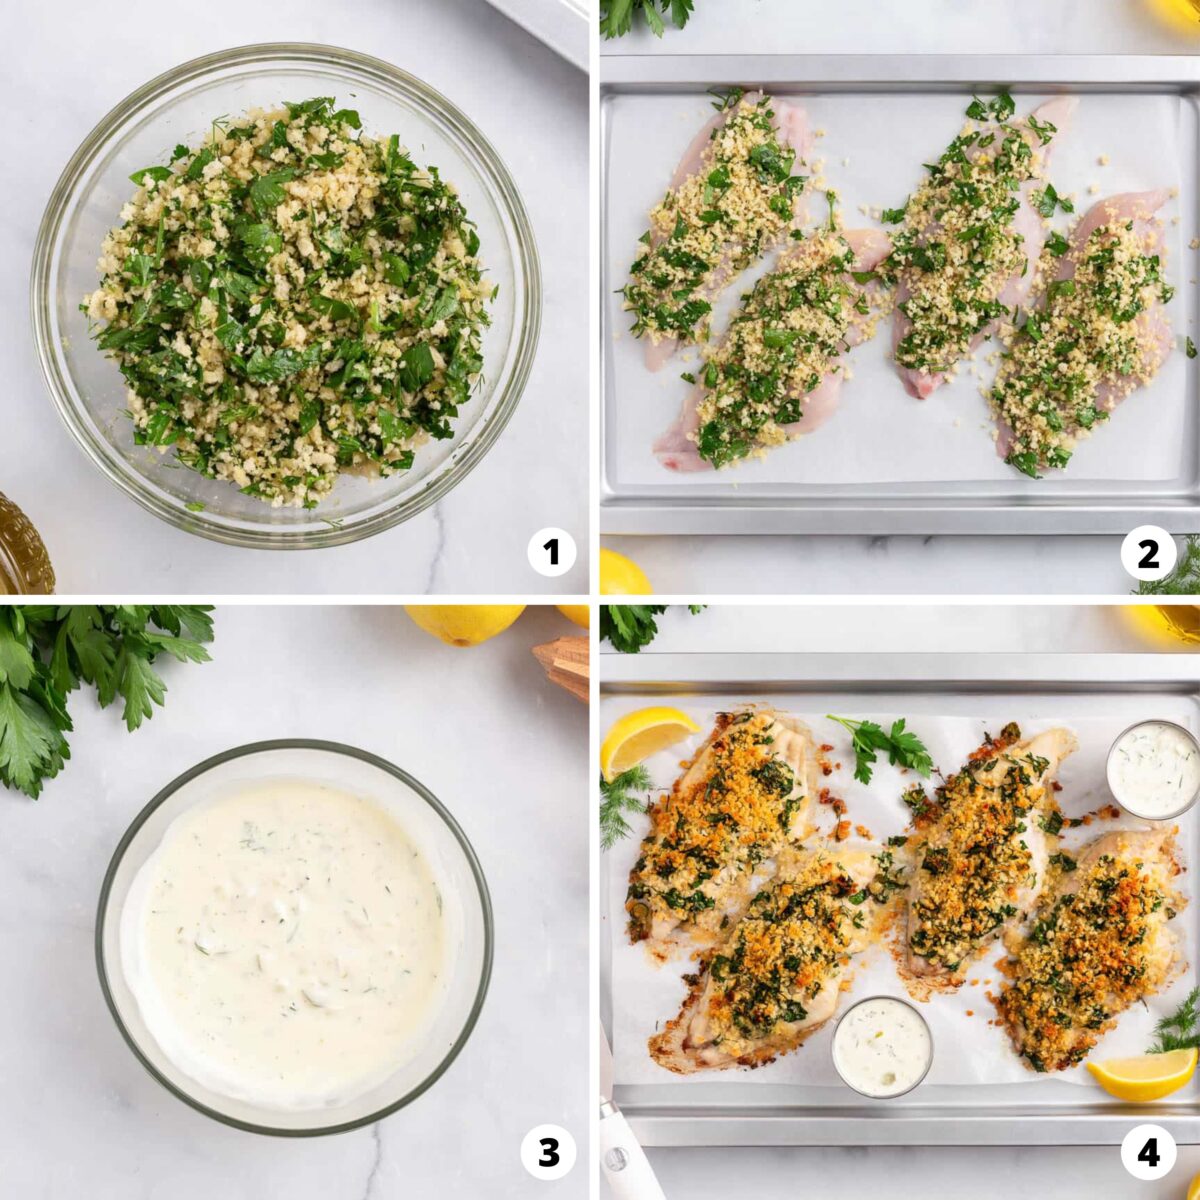 A collage showing steps of how to bake fish.